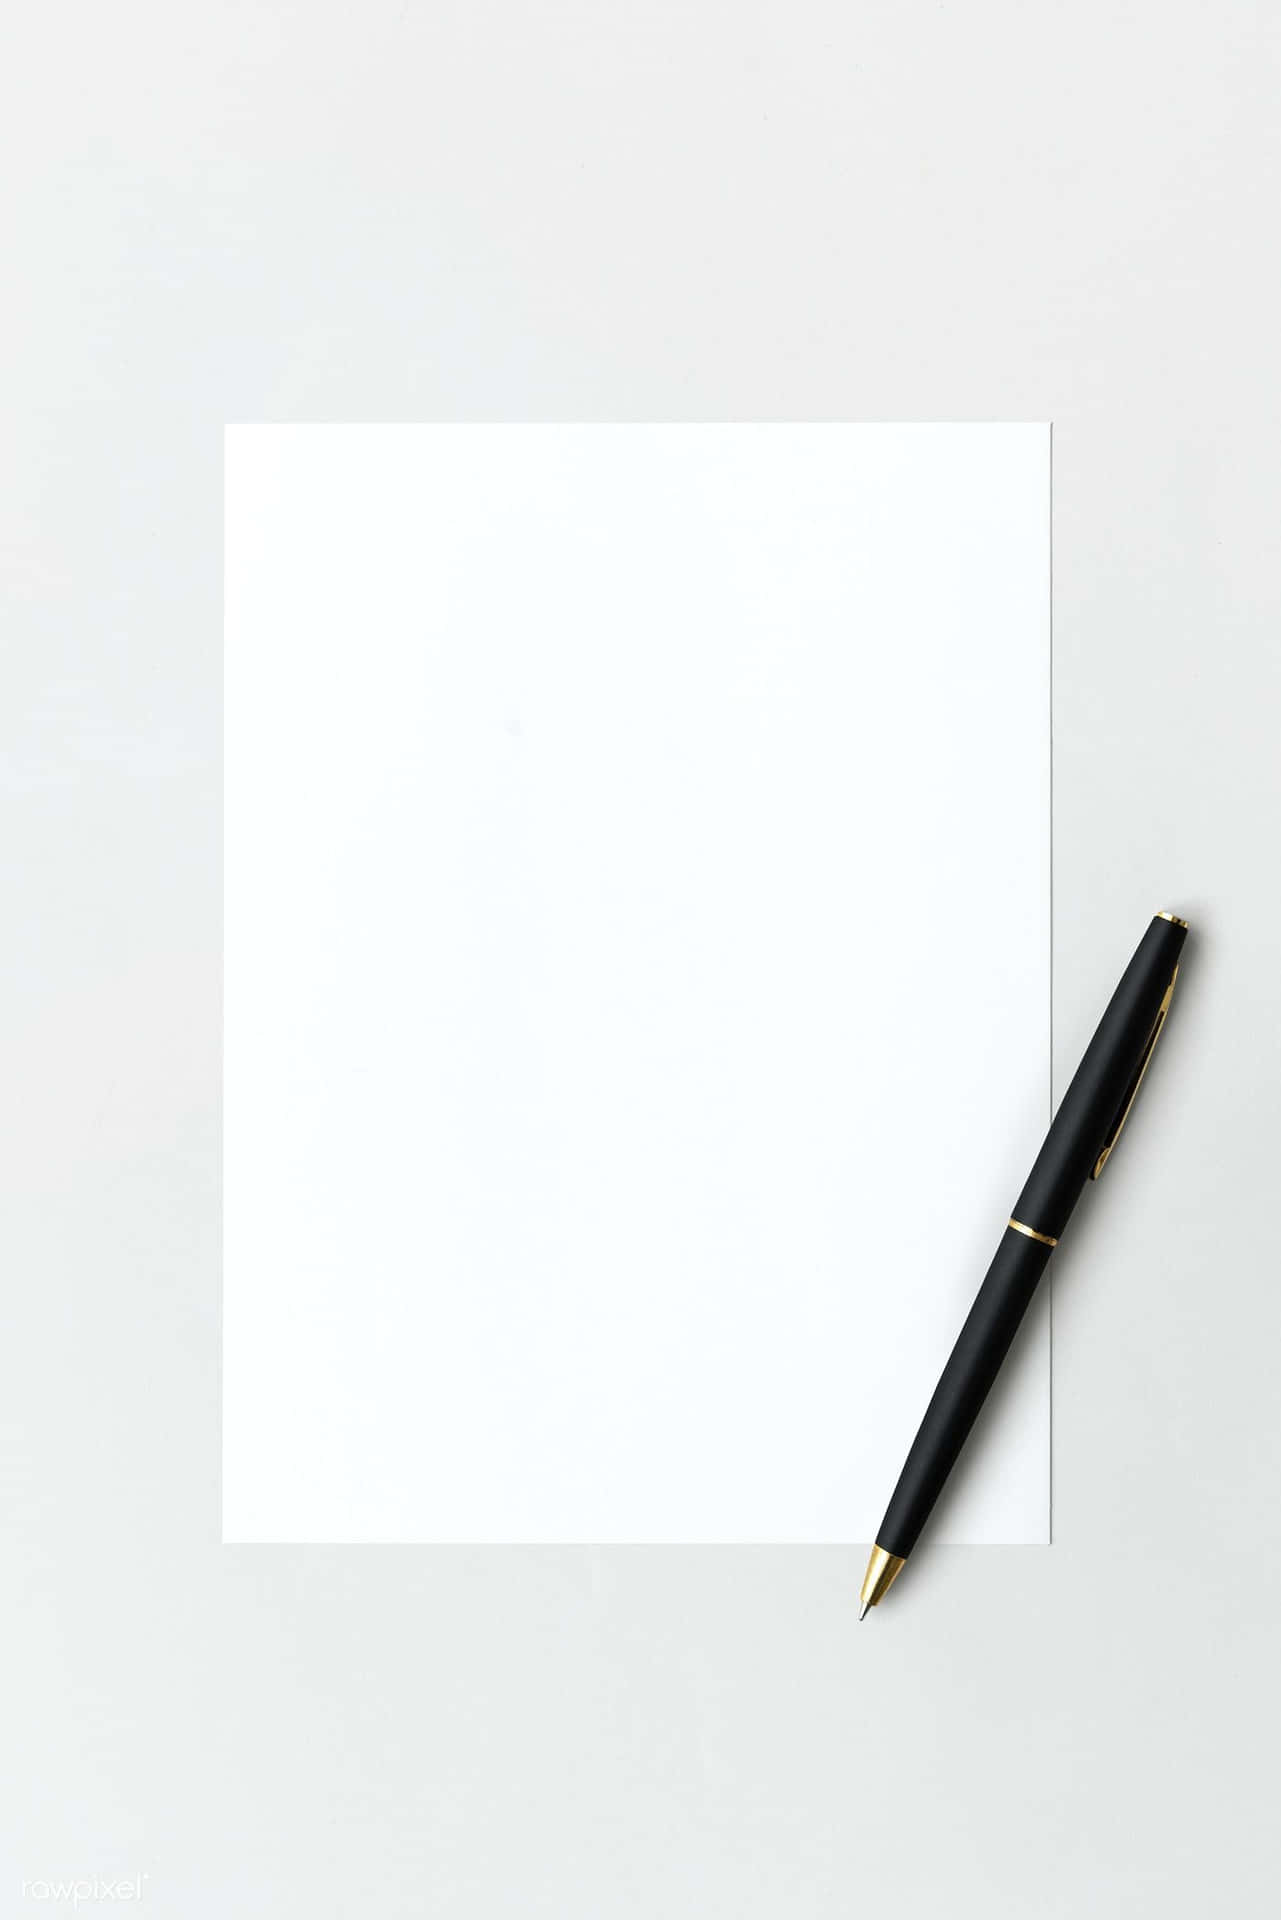 A White Paper With A Pen On Top